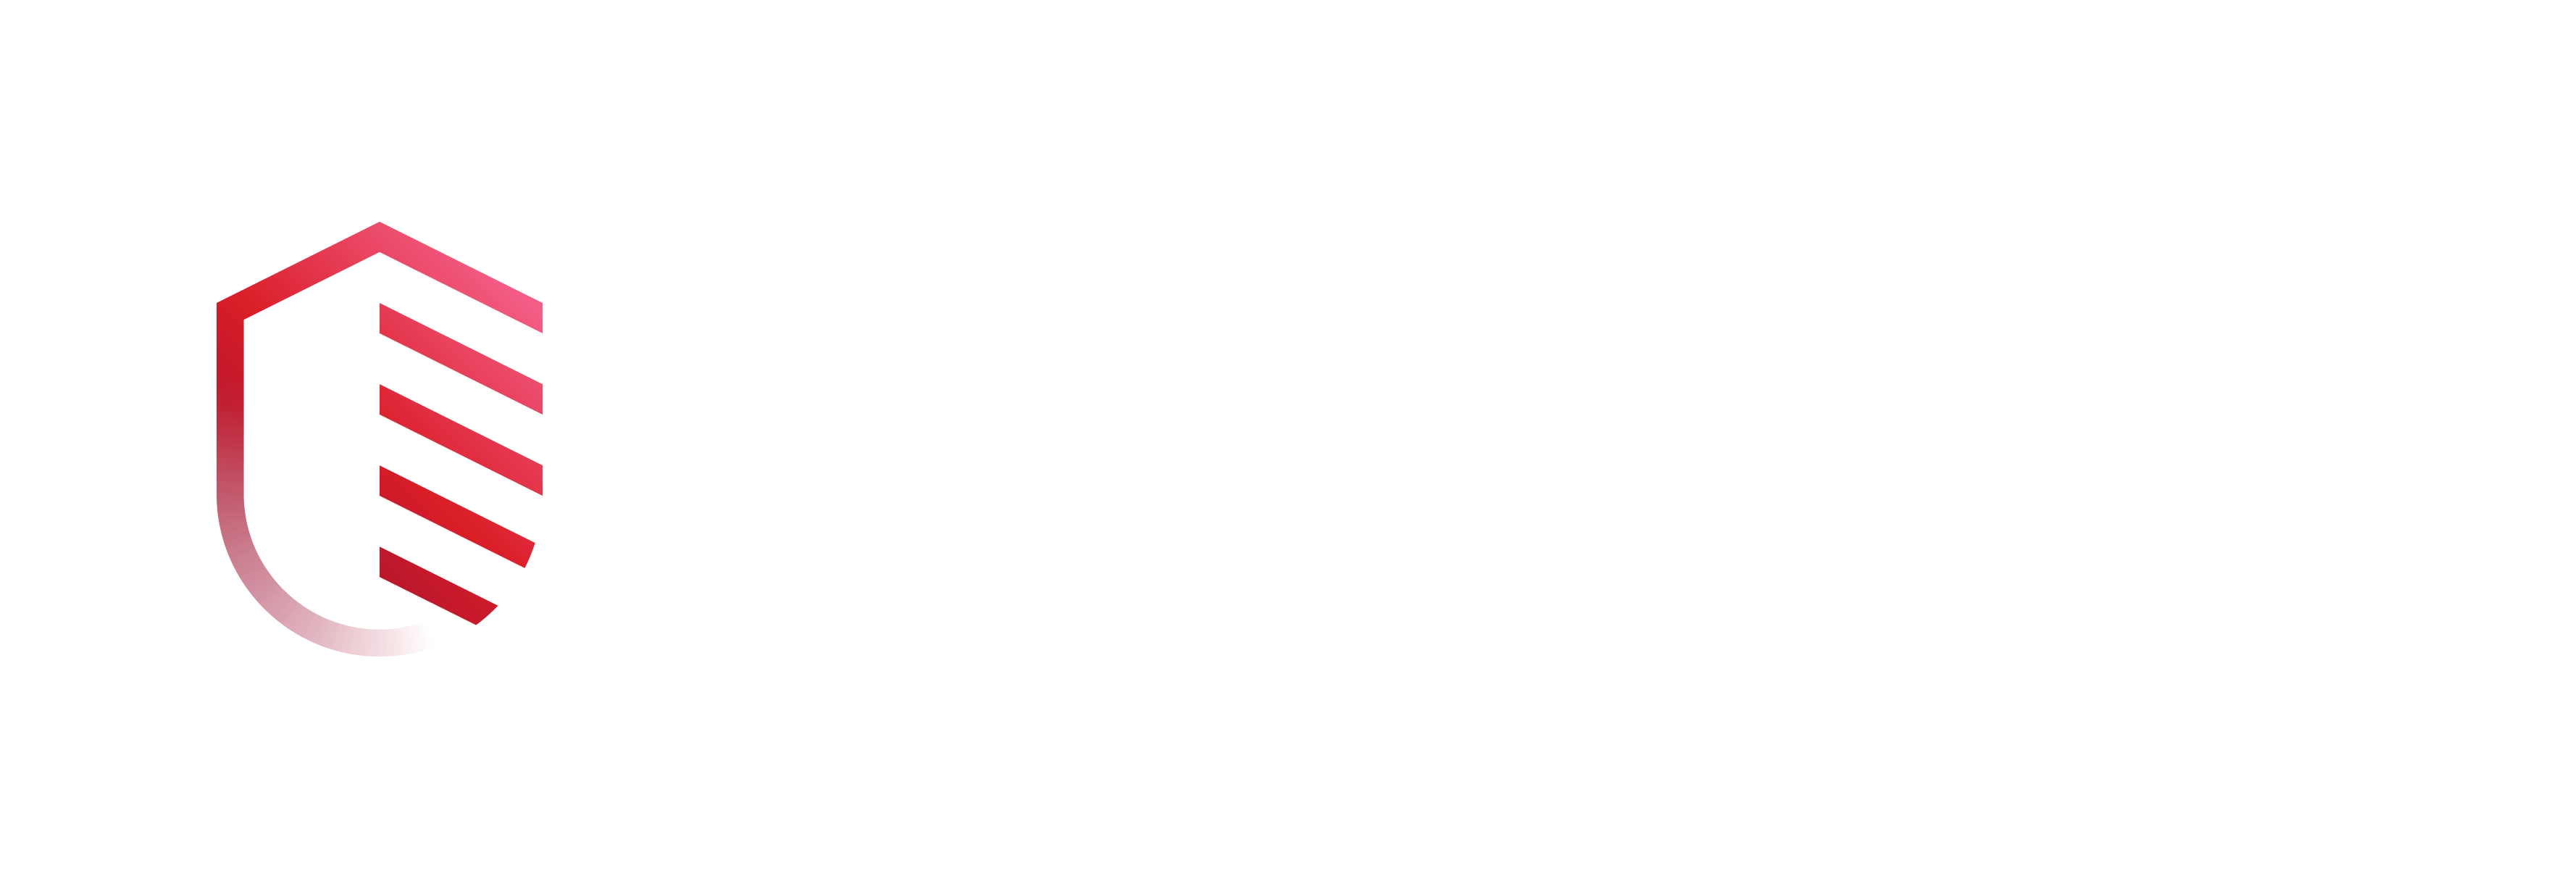 X-force icon